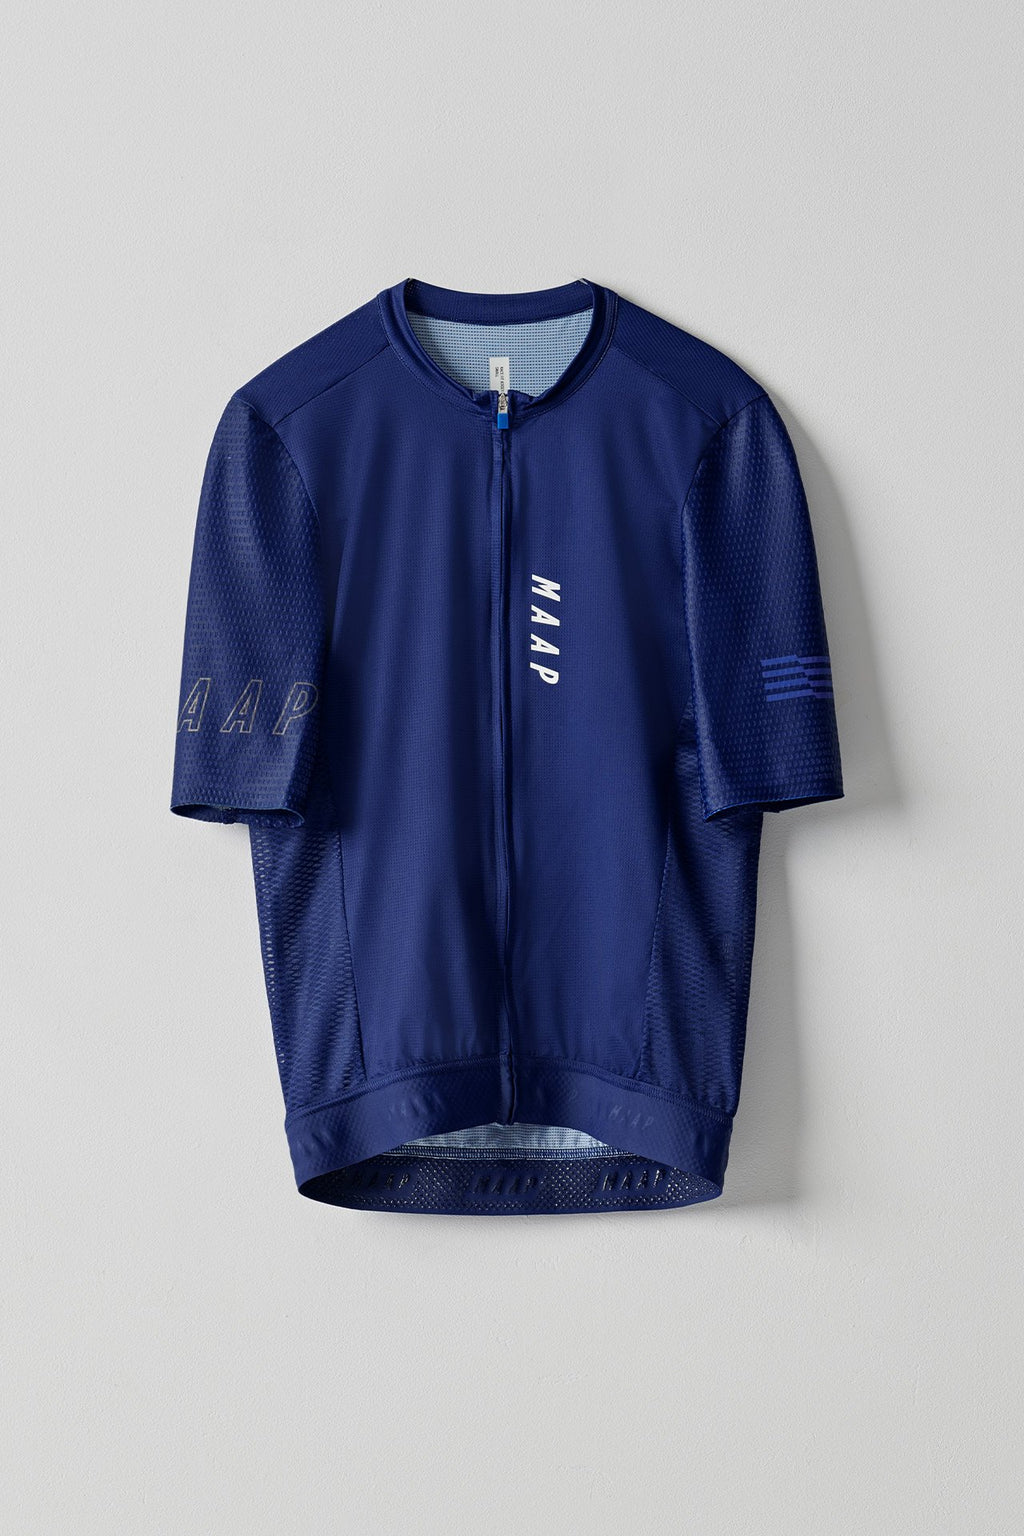 Stealth Race Fit Jersey - Ink